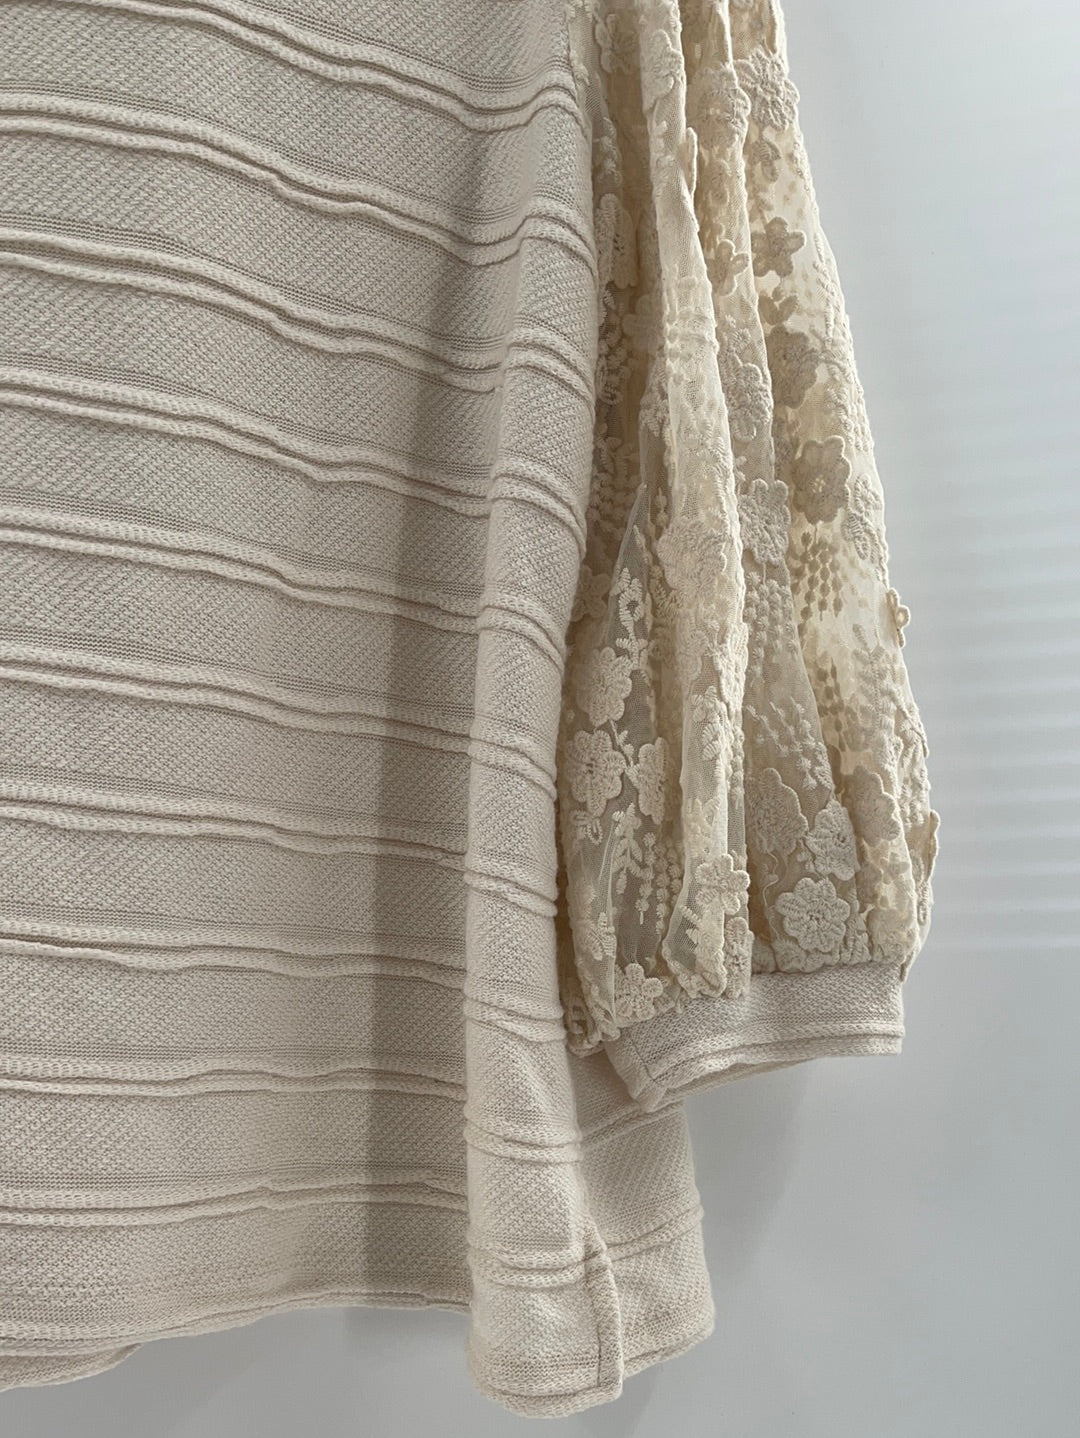 Eri + Ali Cream Knit Top with Dramatic Sleeve (S)